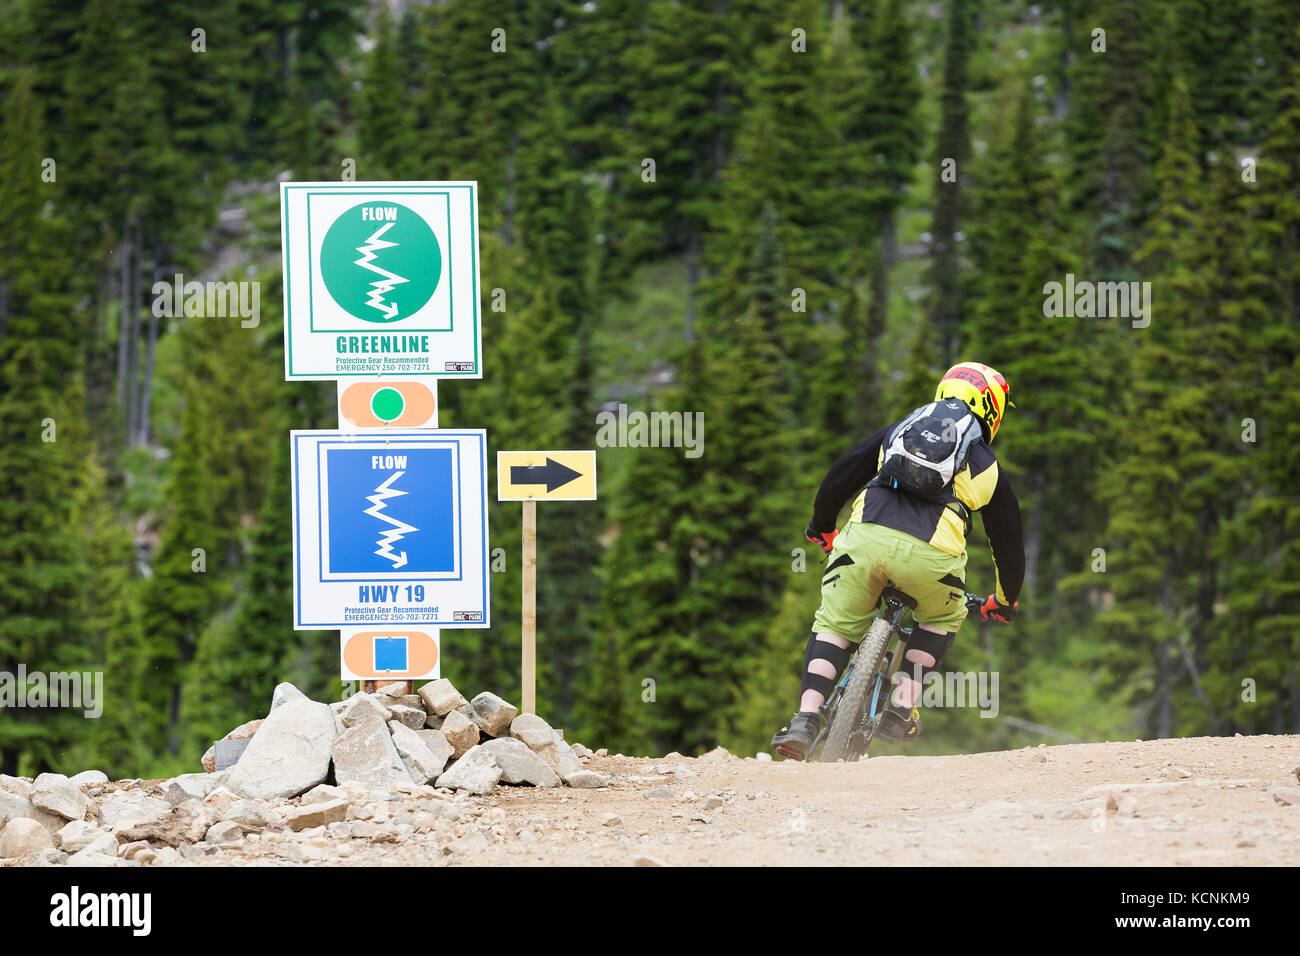 Signage indicating bike trail direction and level of difficulty at Mt. Washington, The Comox Valley, Vancouver Island, British Columbia, Canada Stock Photo